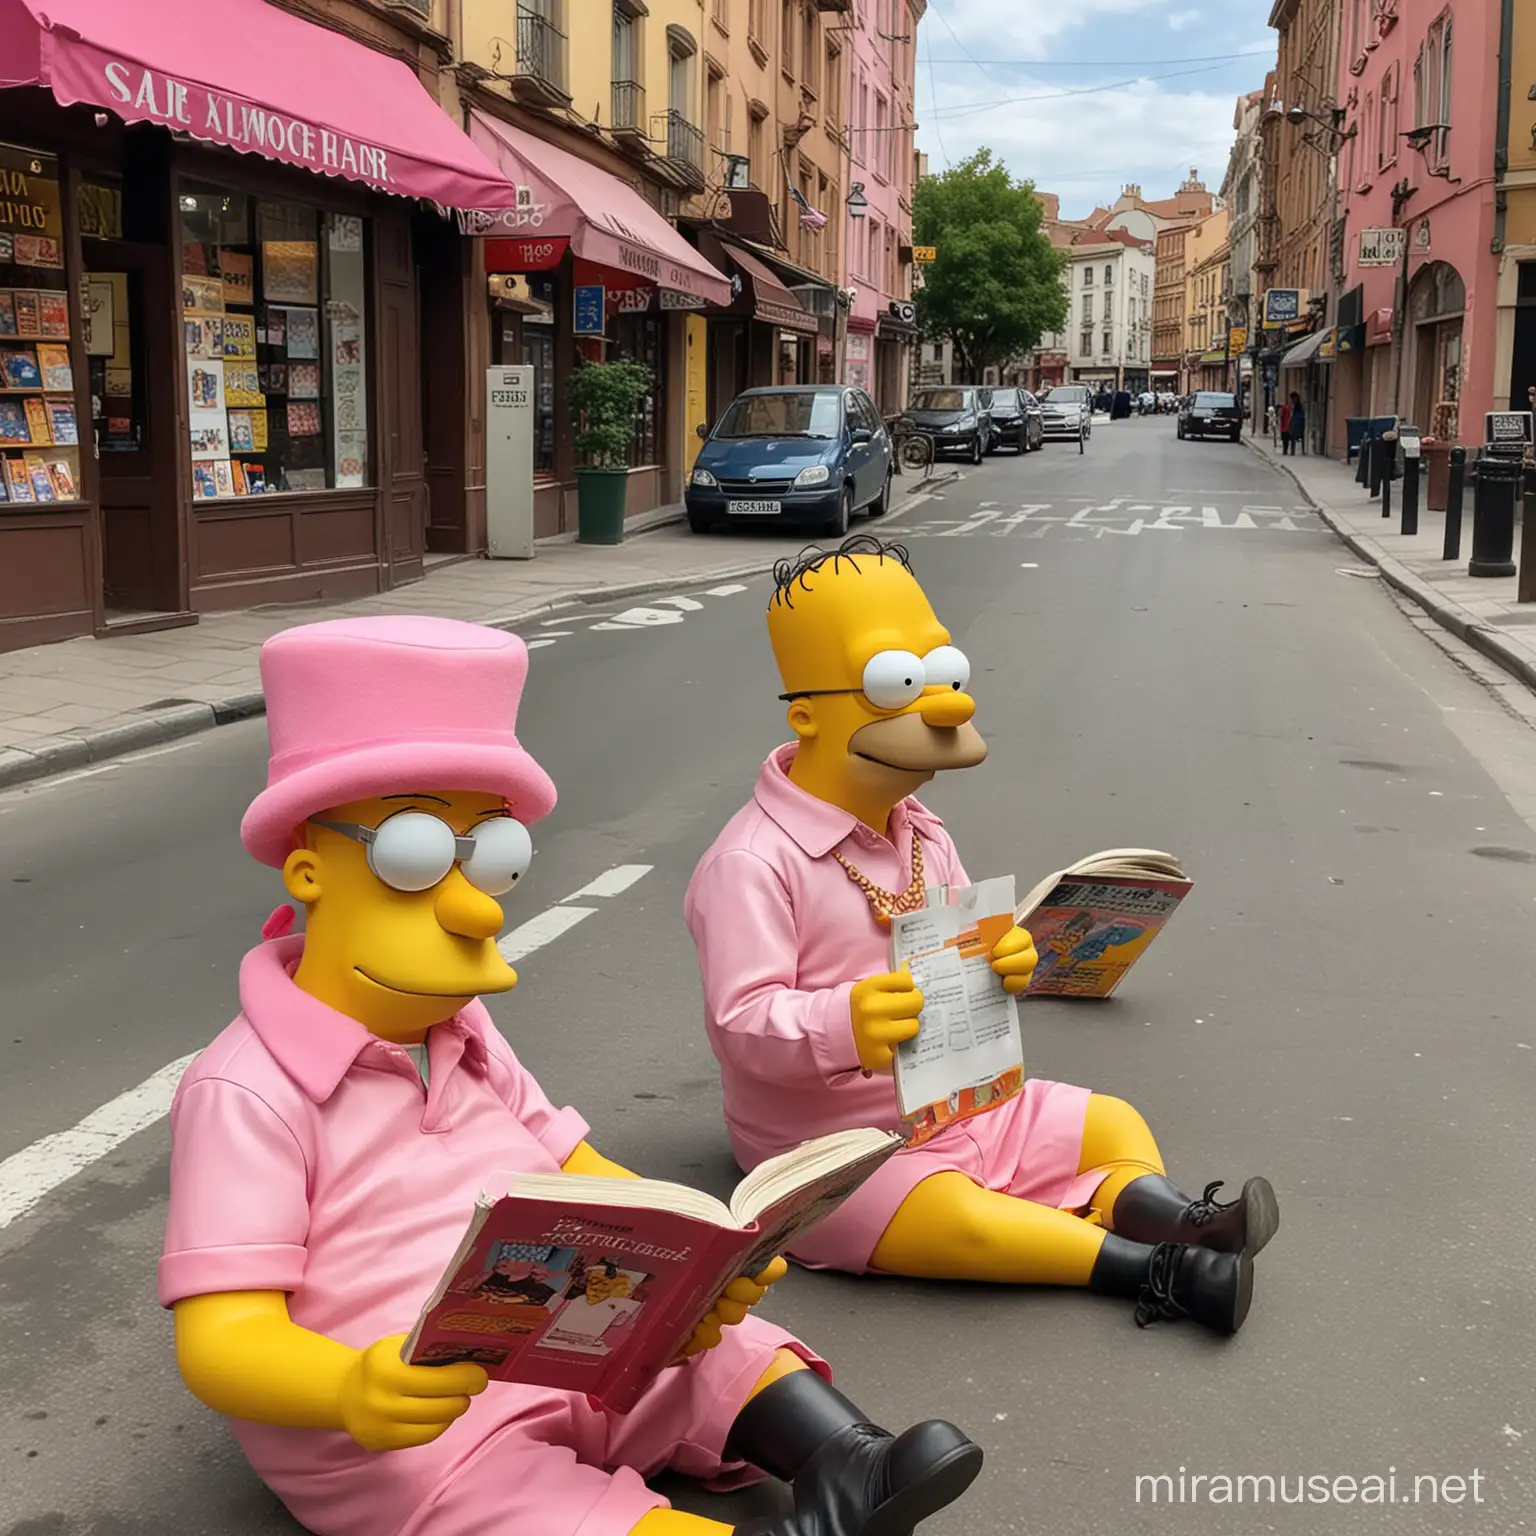 Animated Icons The Simpsons and Pink Panther Enjoying a Comic Book on the Sidewalk